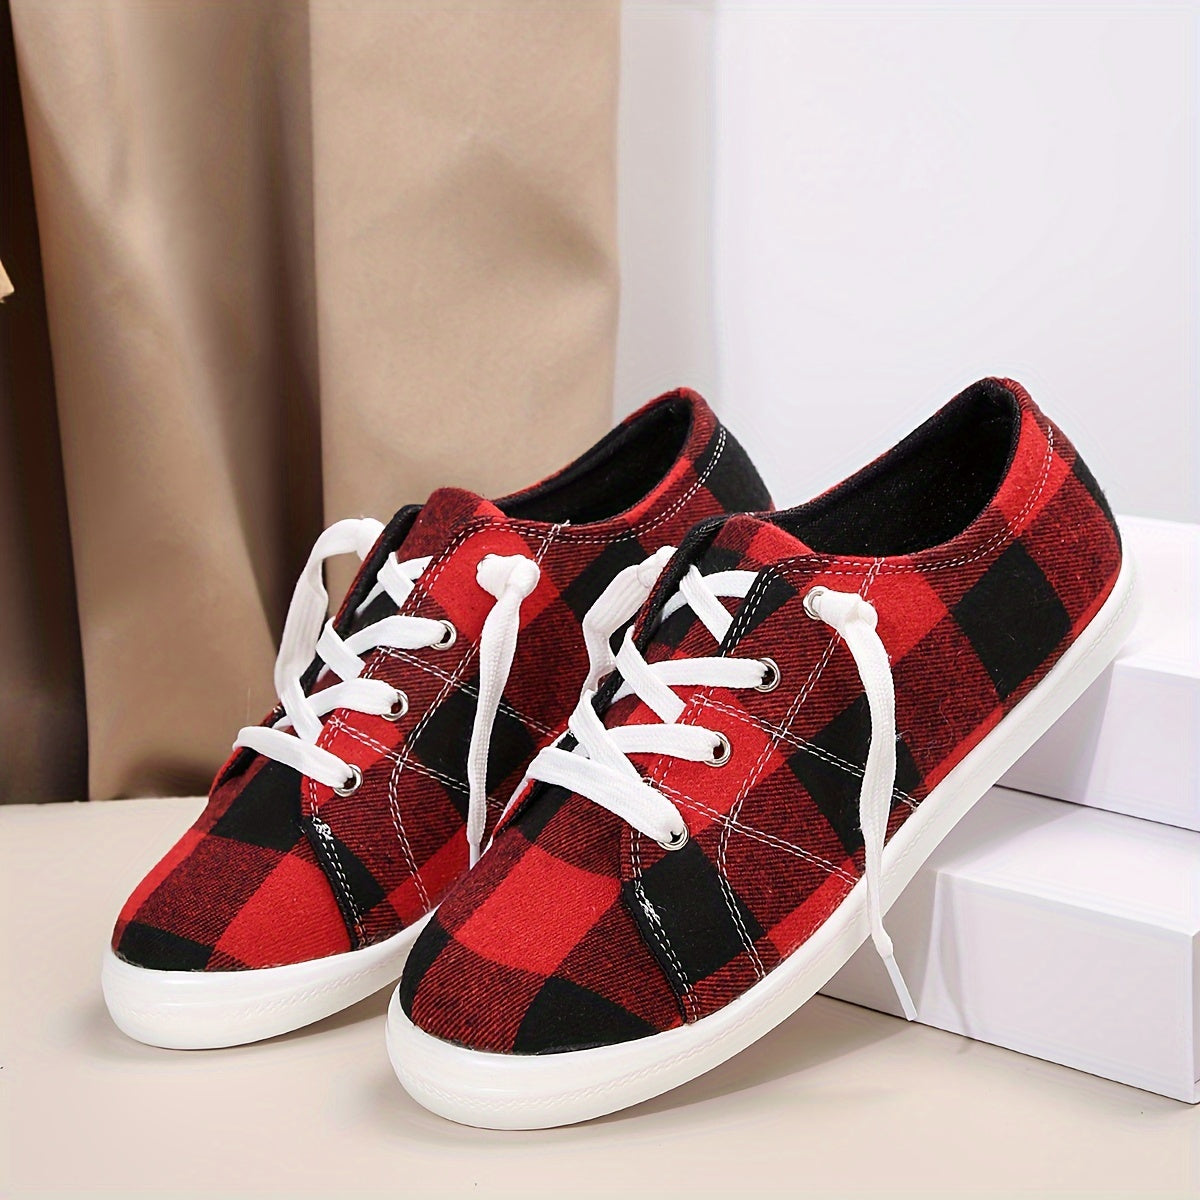 Women's Colorblock Plaid Pattern Shoes, Slip On Low-top Round Toe Non-slip Outdoor Canvas Shoes, Casual Daily Shoes